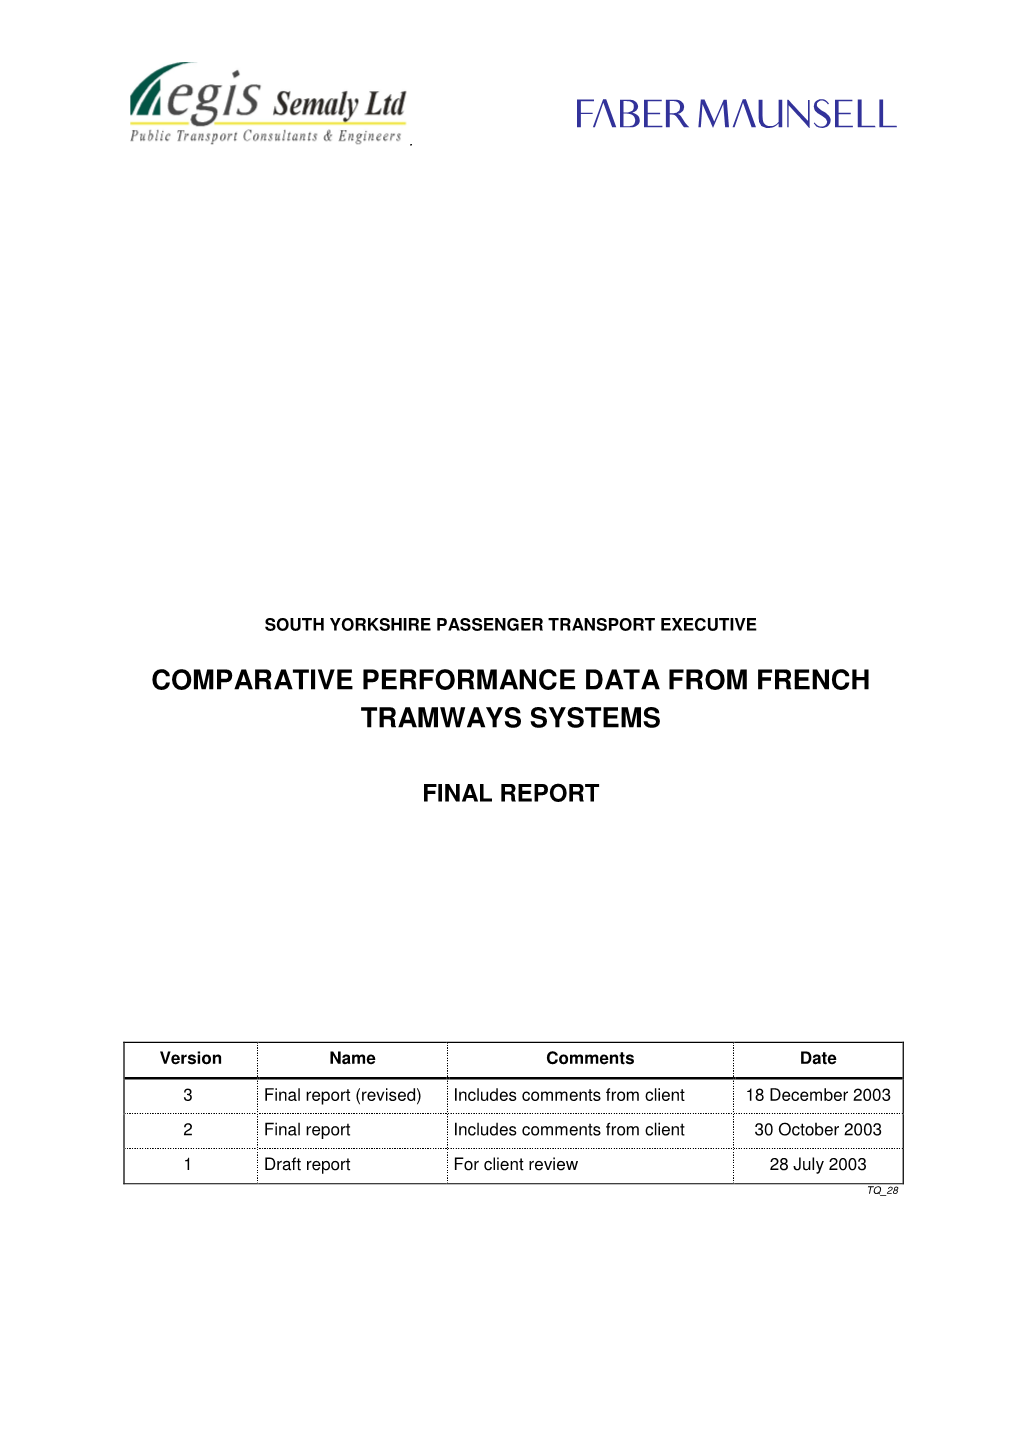 Comparative Performance Data from French Tramways Systems